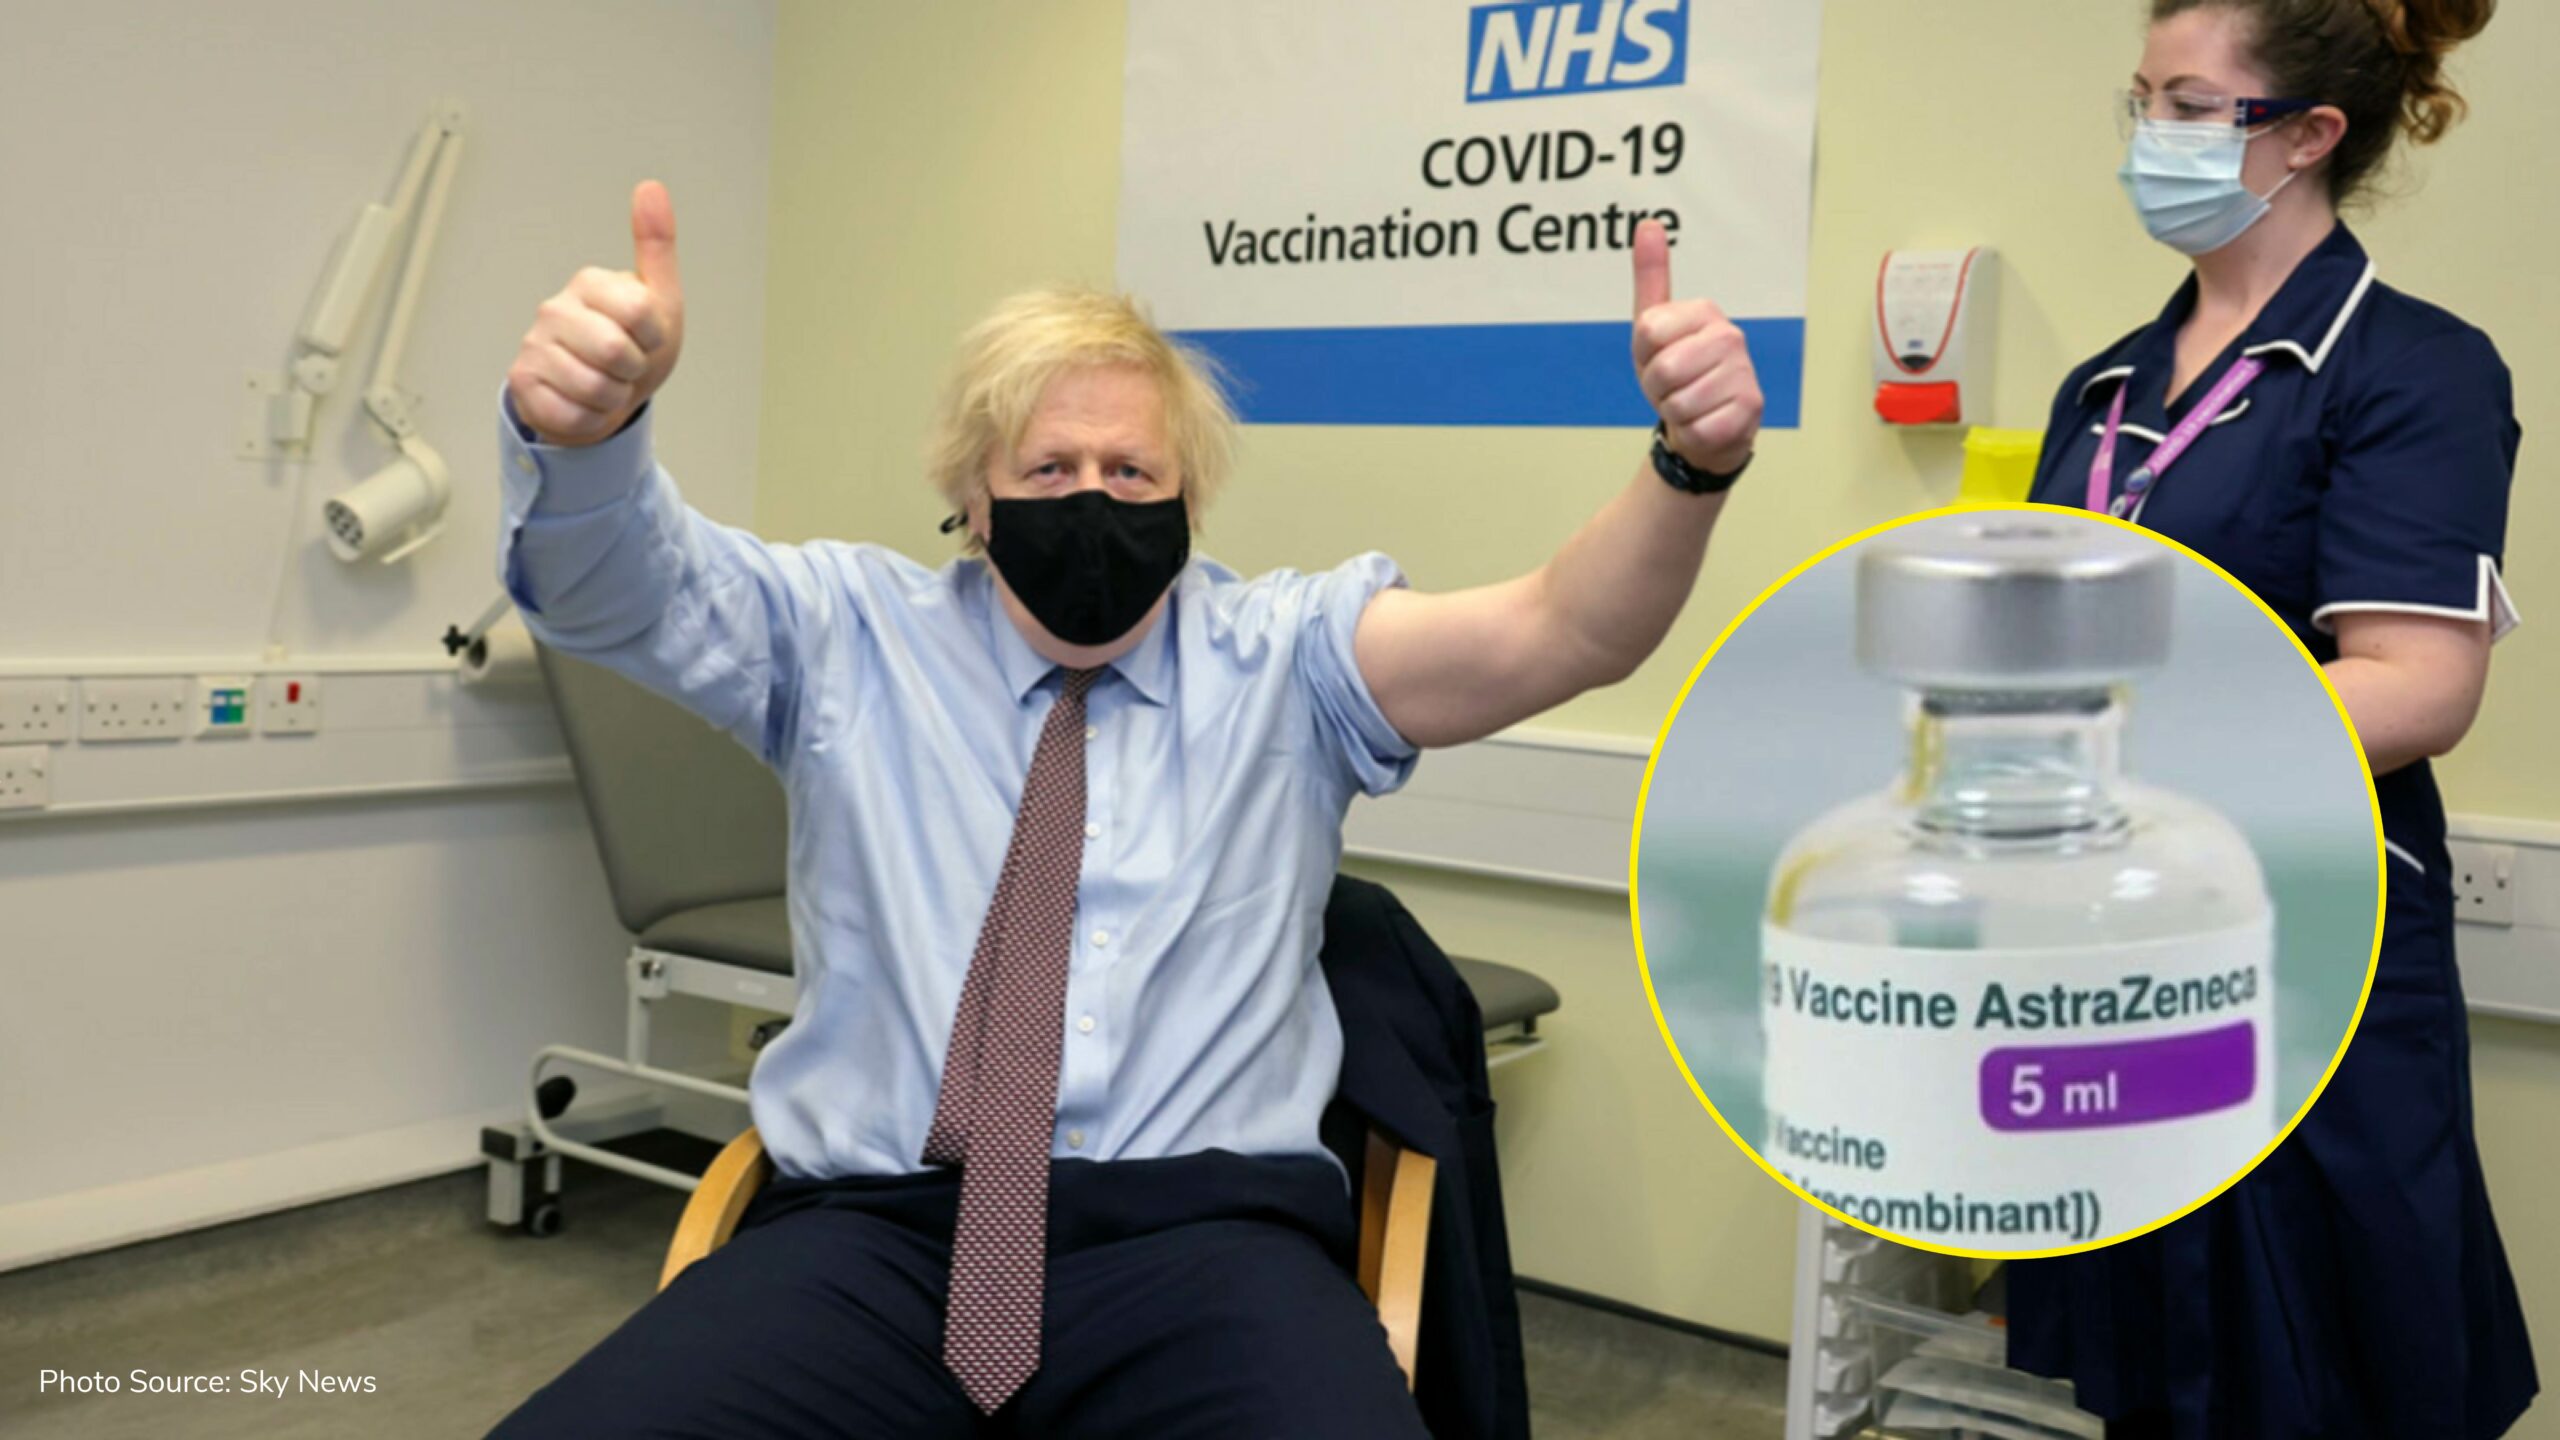 Boris Johnson gives two thumbs up after receiving first AstraZeneca jab